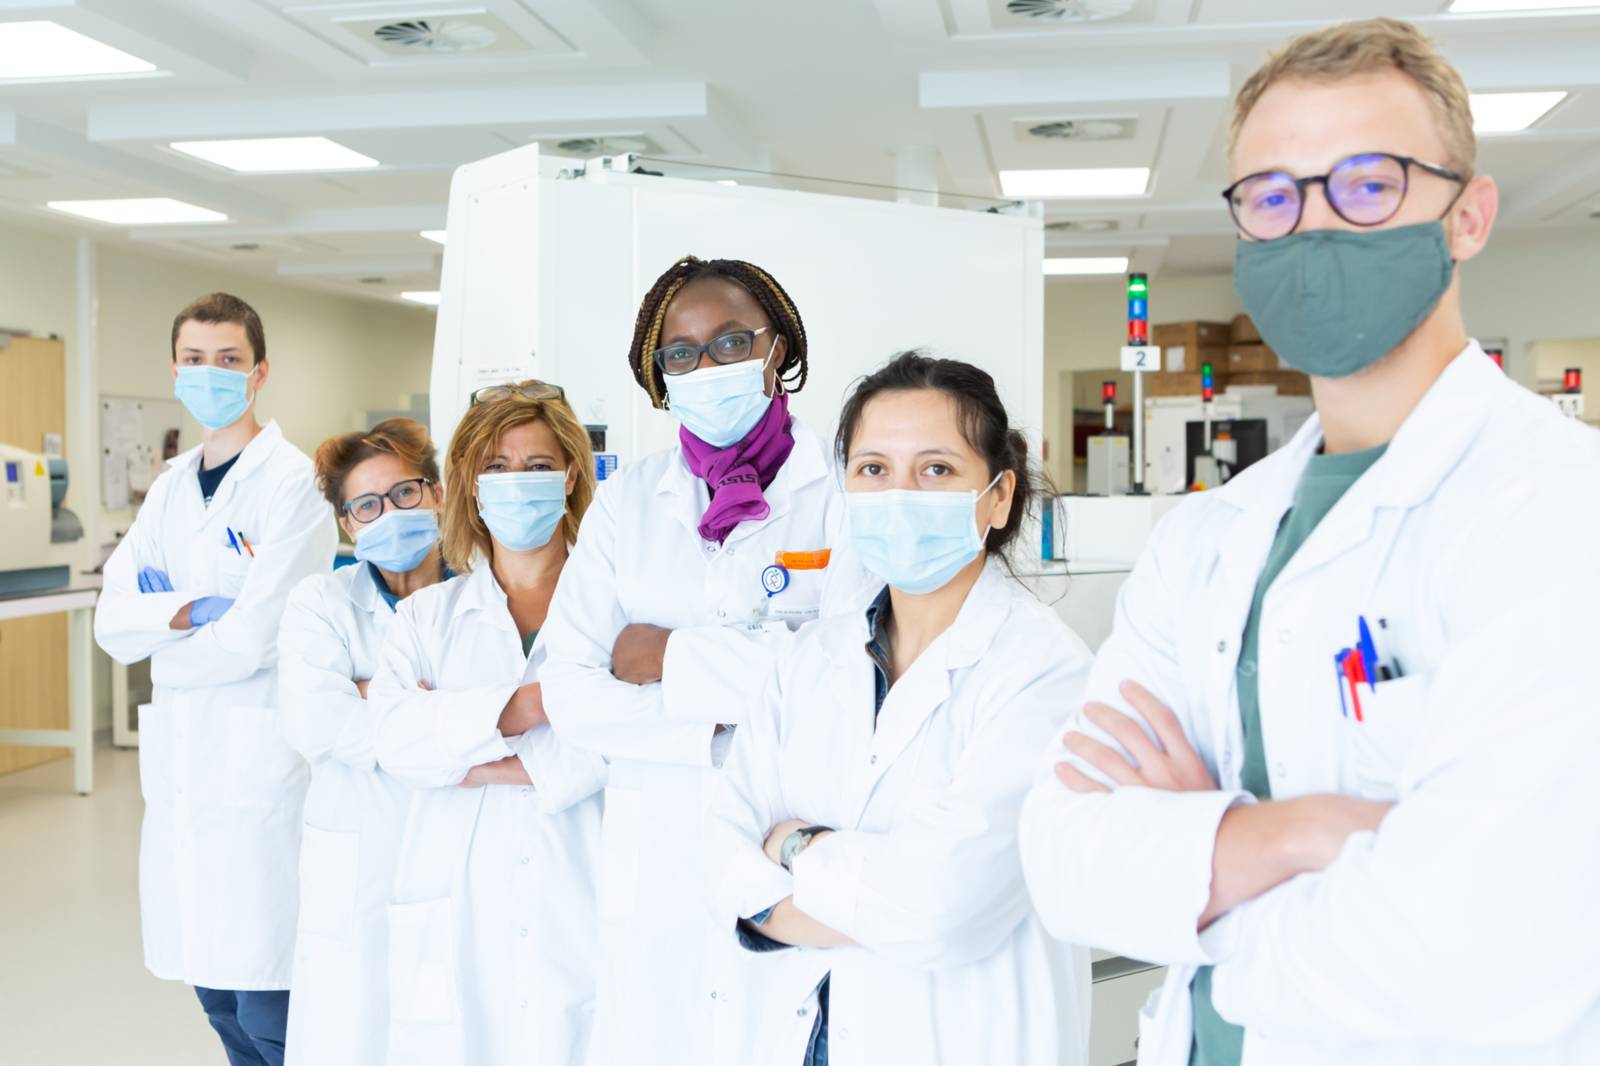 Dr. Véronique Yvette Miendje Deyi and her team working in their laboratory